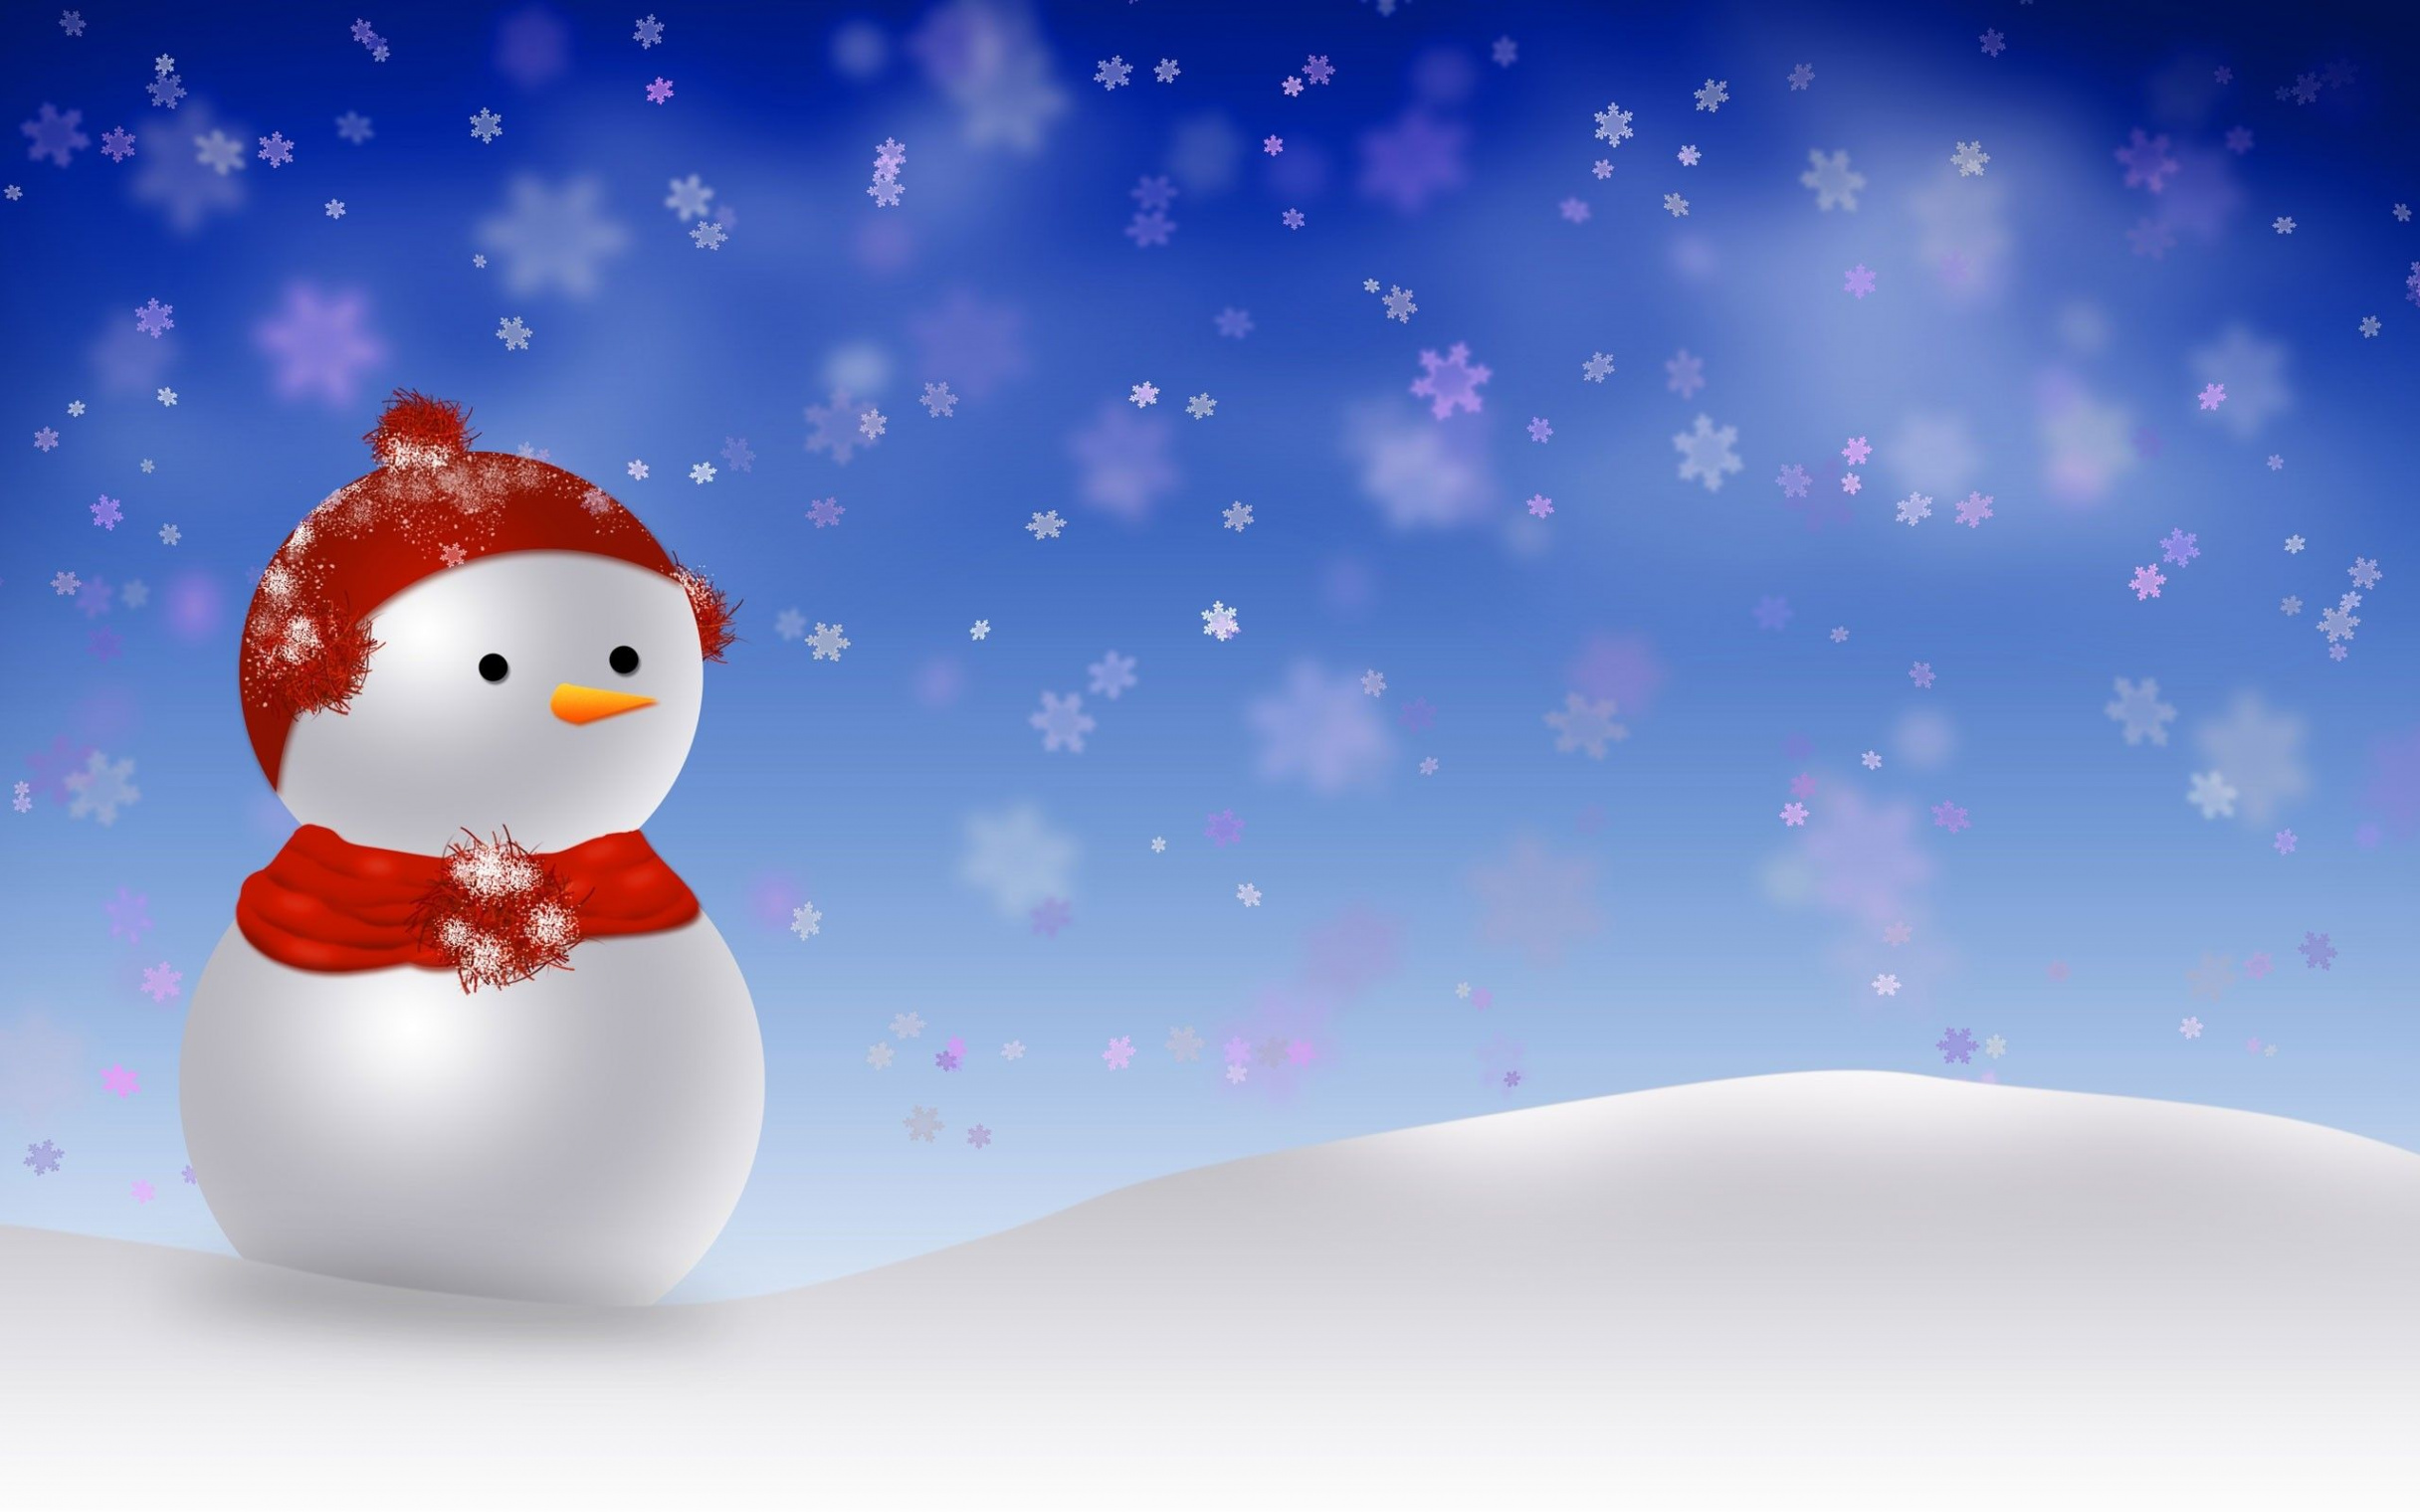 animated christmas background - Google Search  Merry christmas